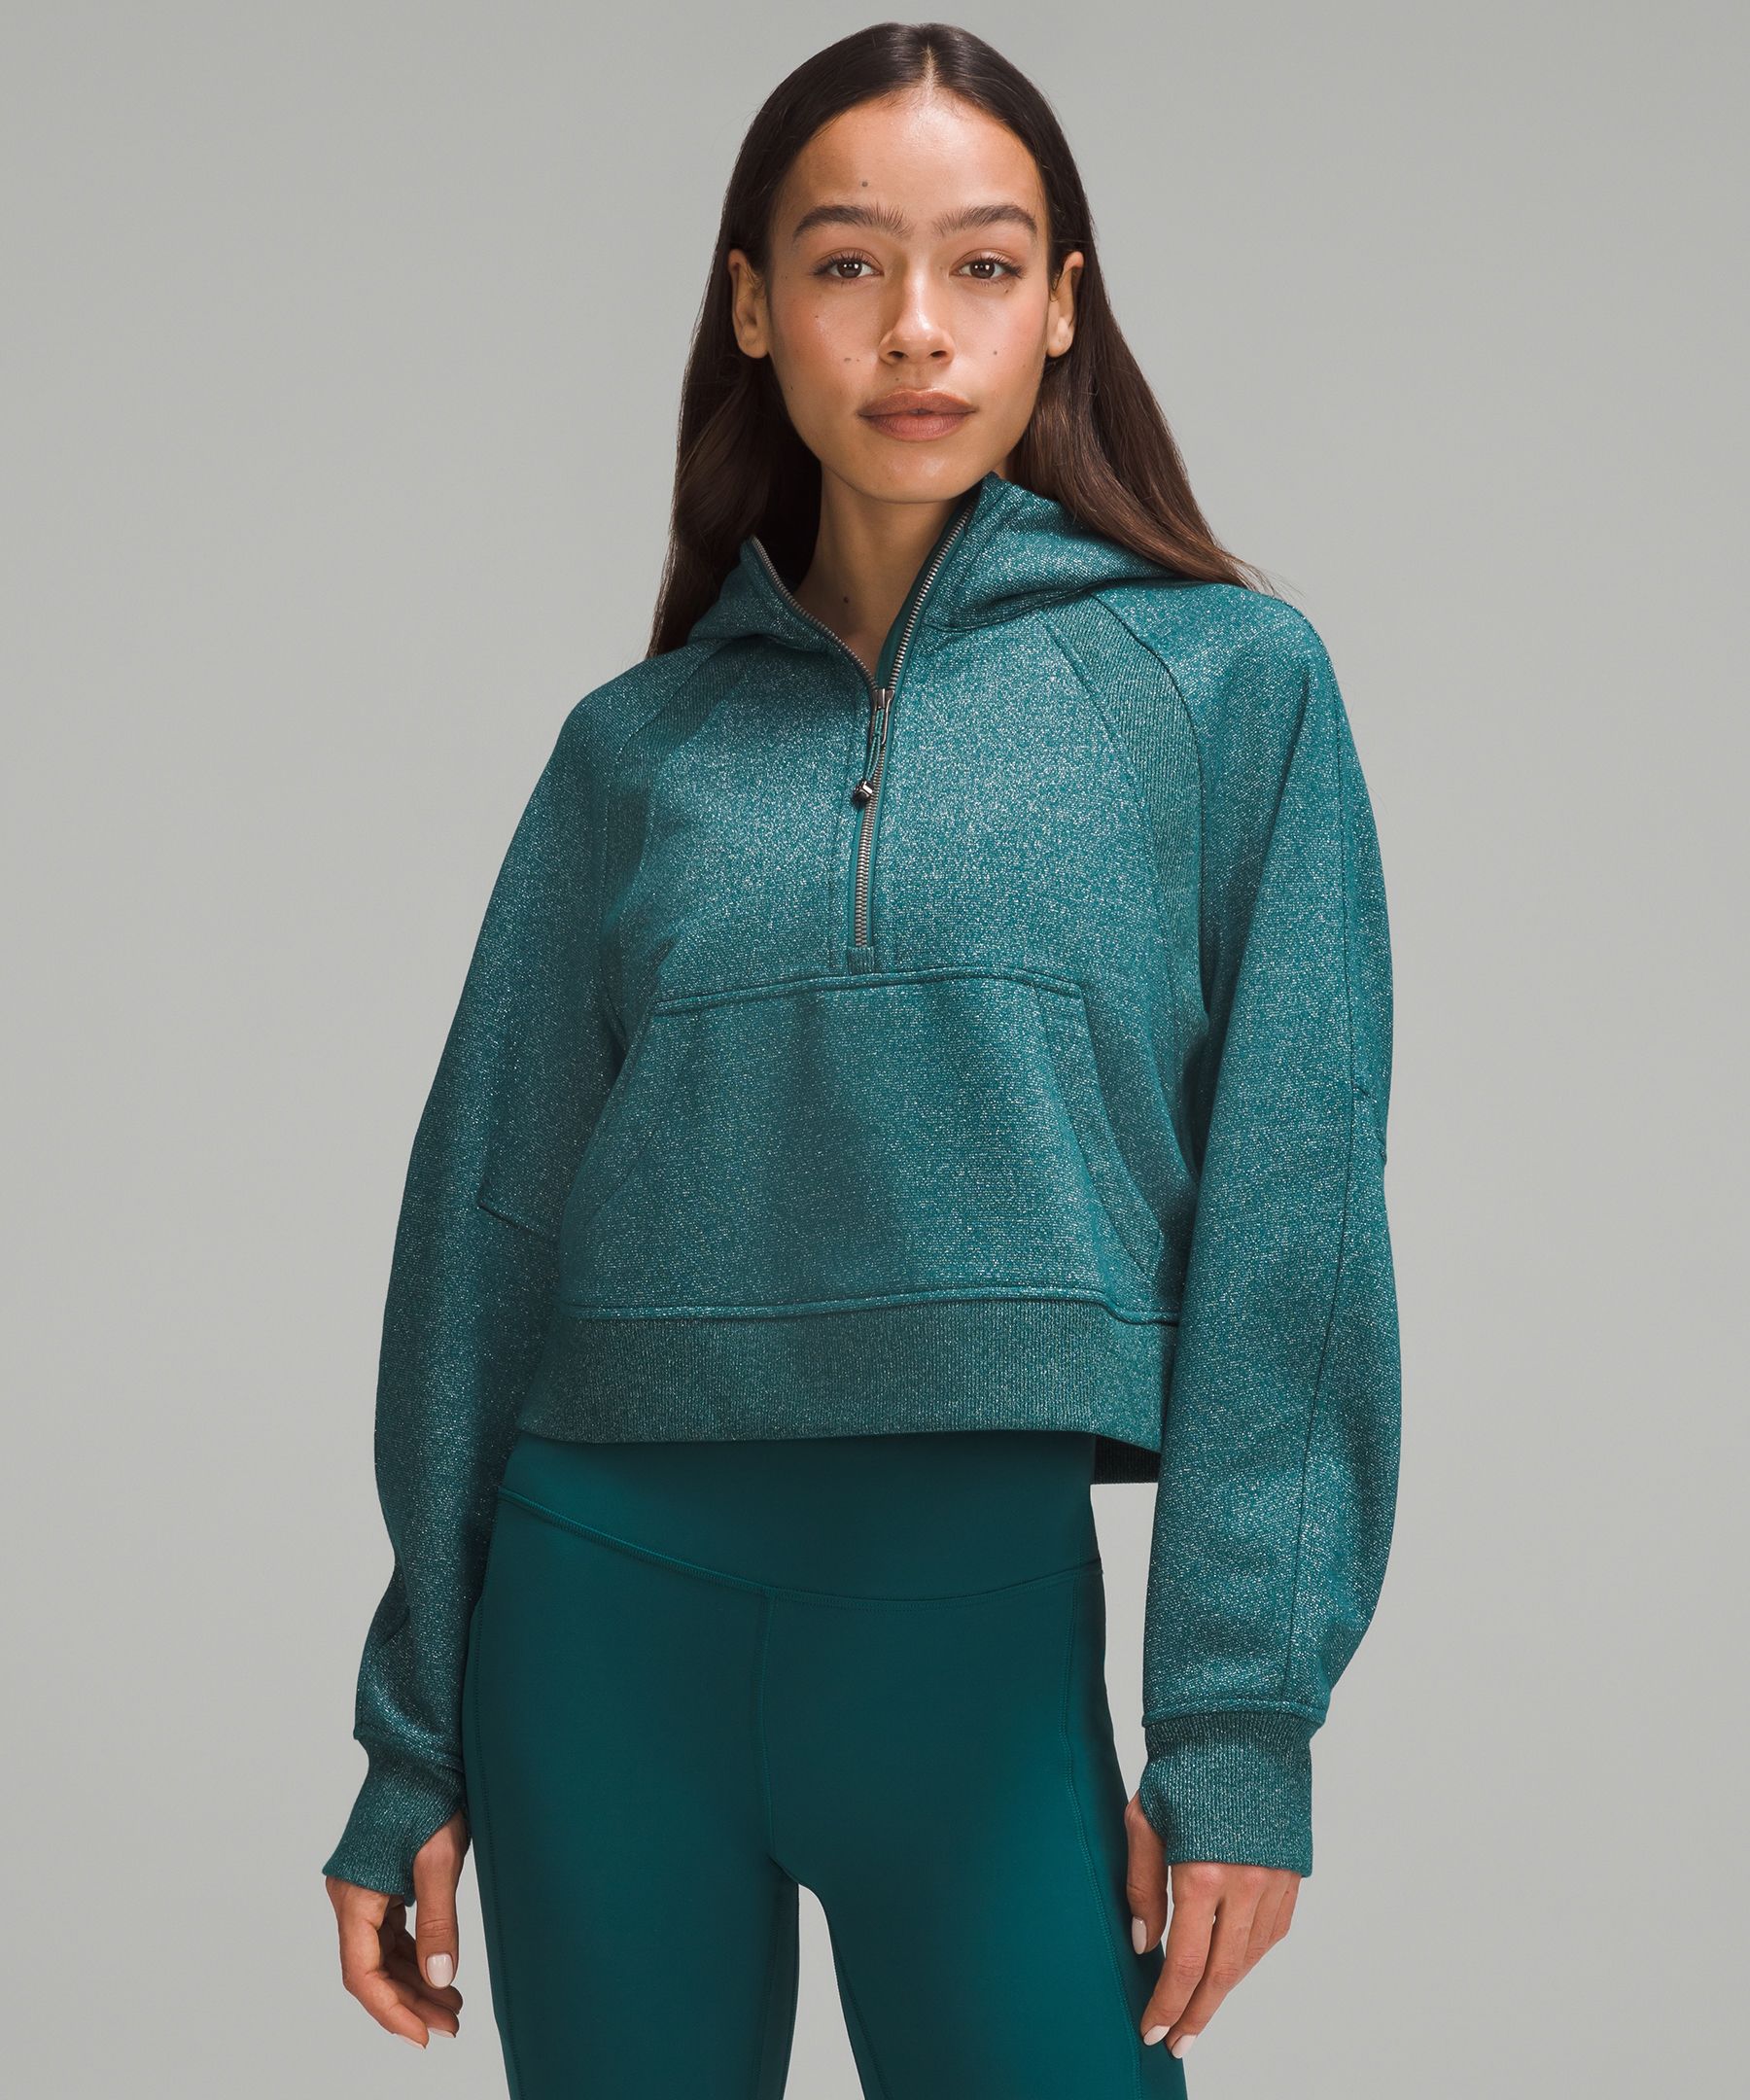 OFFICIALLY OBSESSED w the scuba half zip! I will be hibernating in this all  winter! I bought it when it first released in black and returned it but I  love the heathered